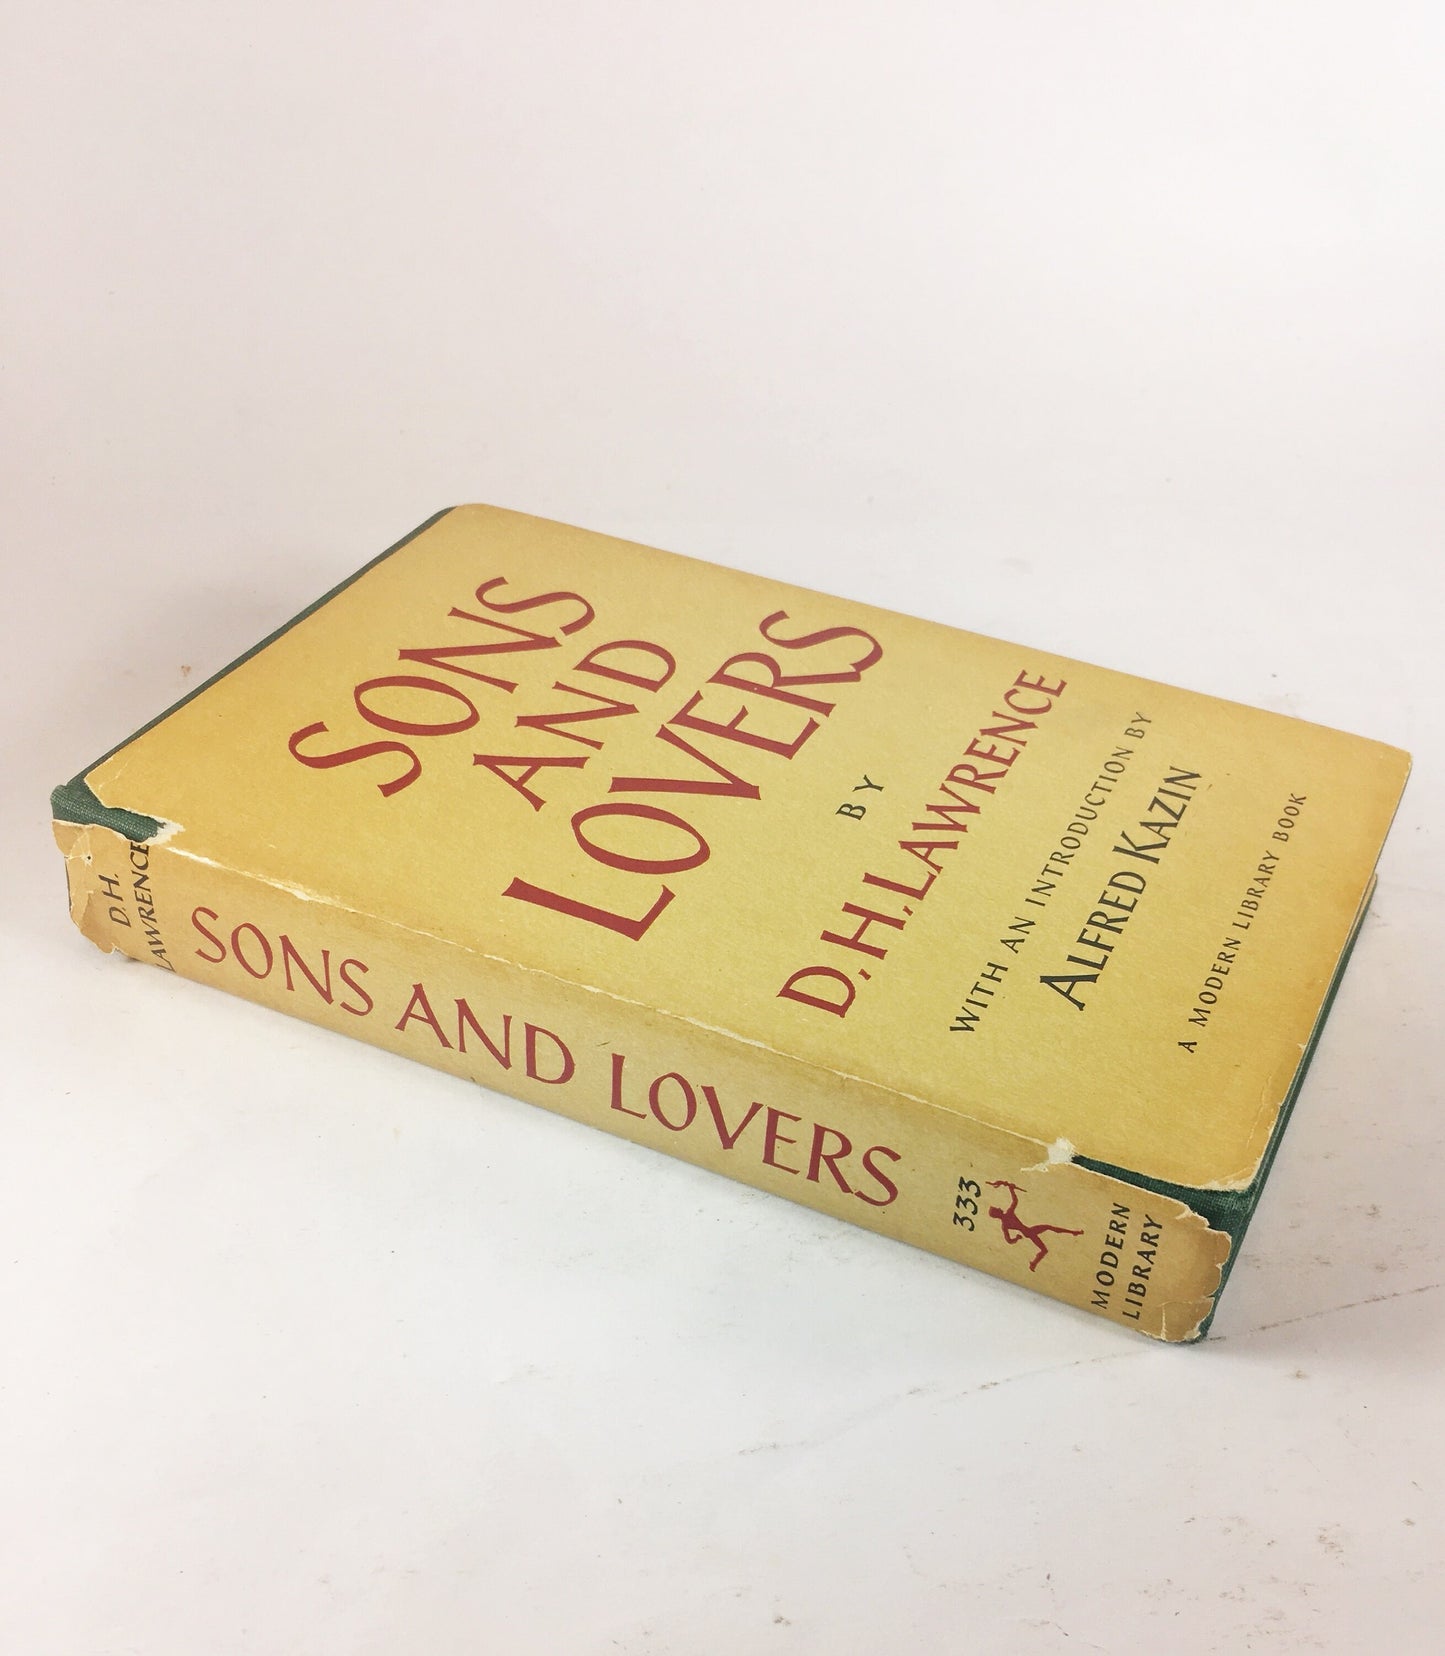 Sons and Lovers by DH Lawrence. Vintage Modern Library Book circa 1962. Oedipus complex Freudian allegory. Listed in top 10 books!